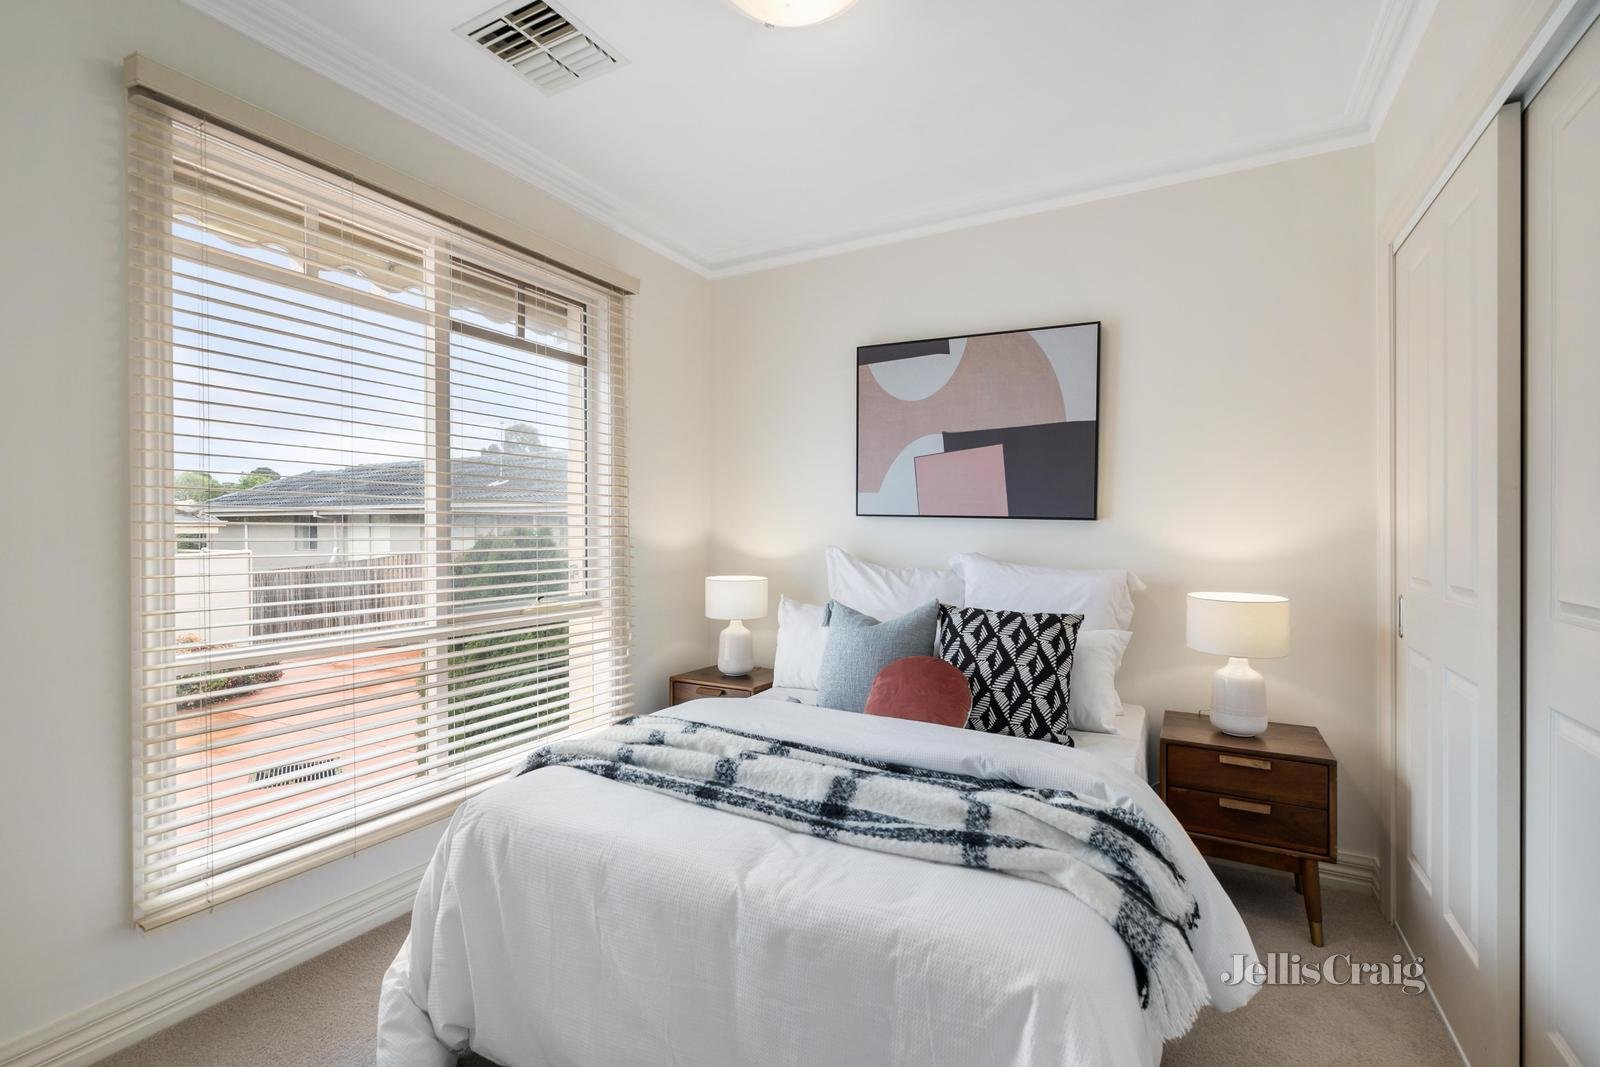 2/4 Gedye Street, Doncaster East image 8